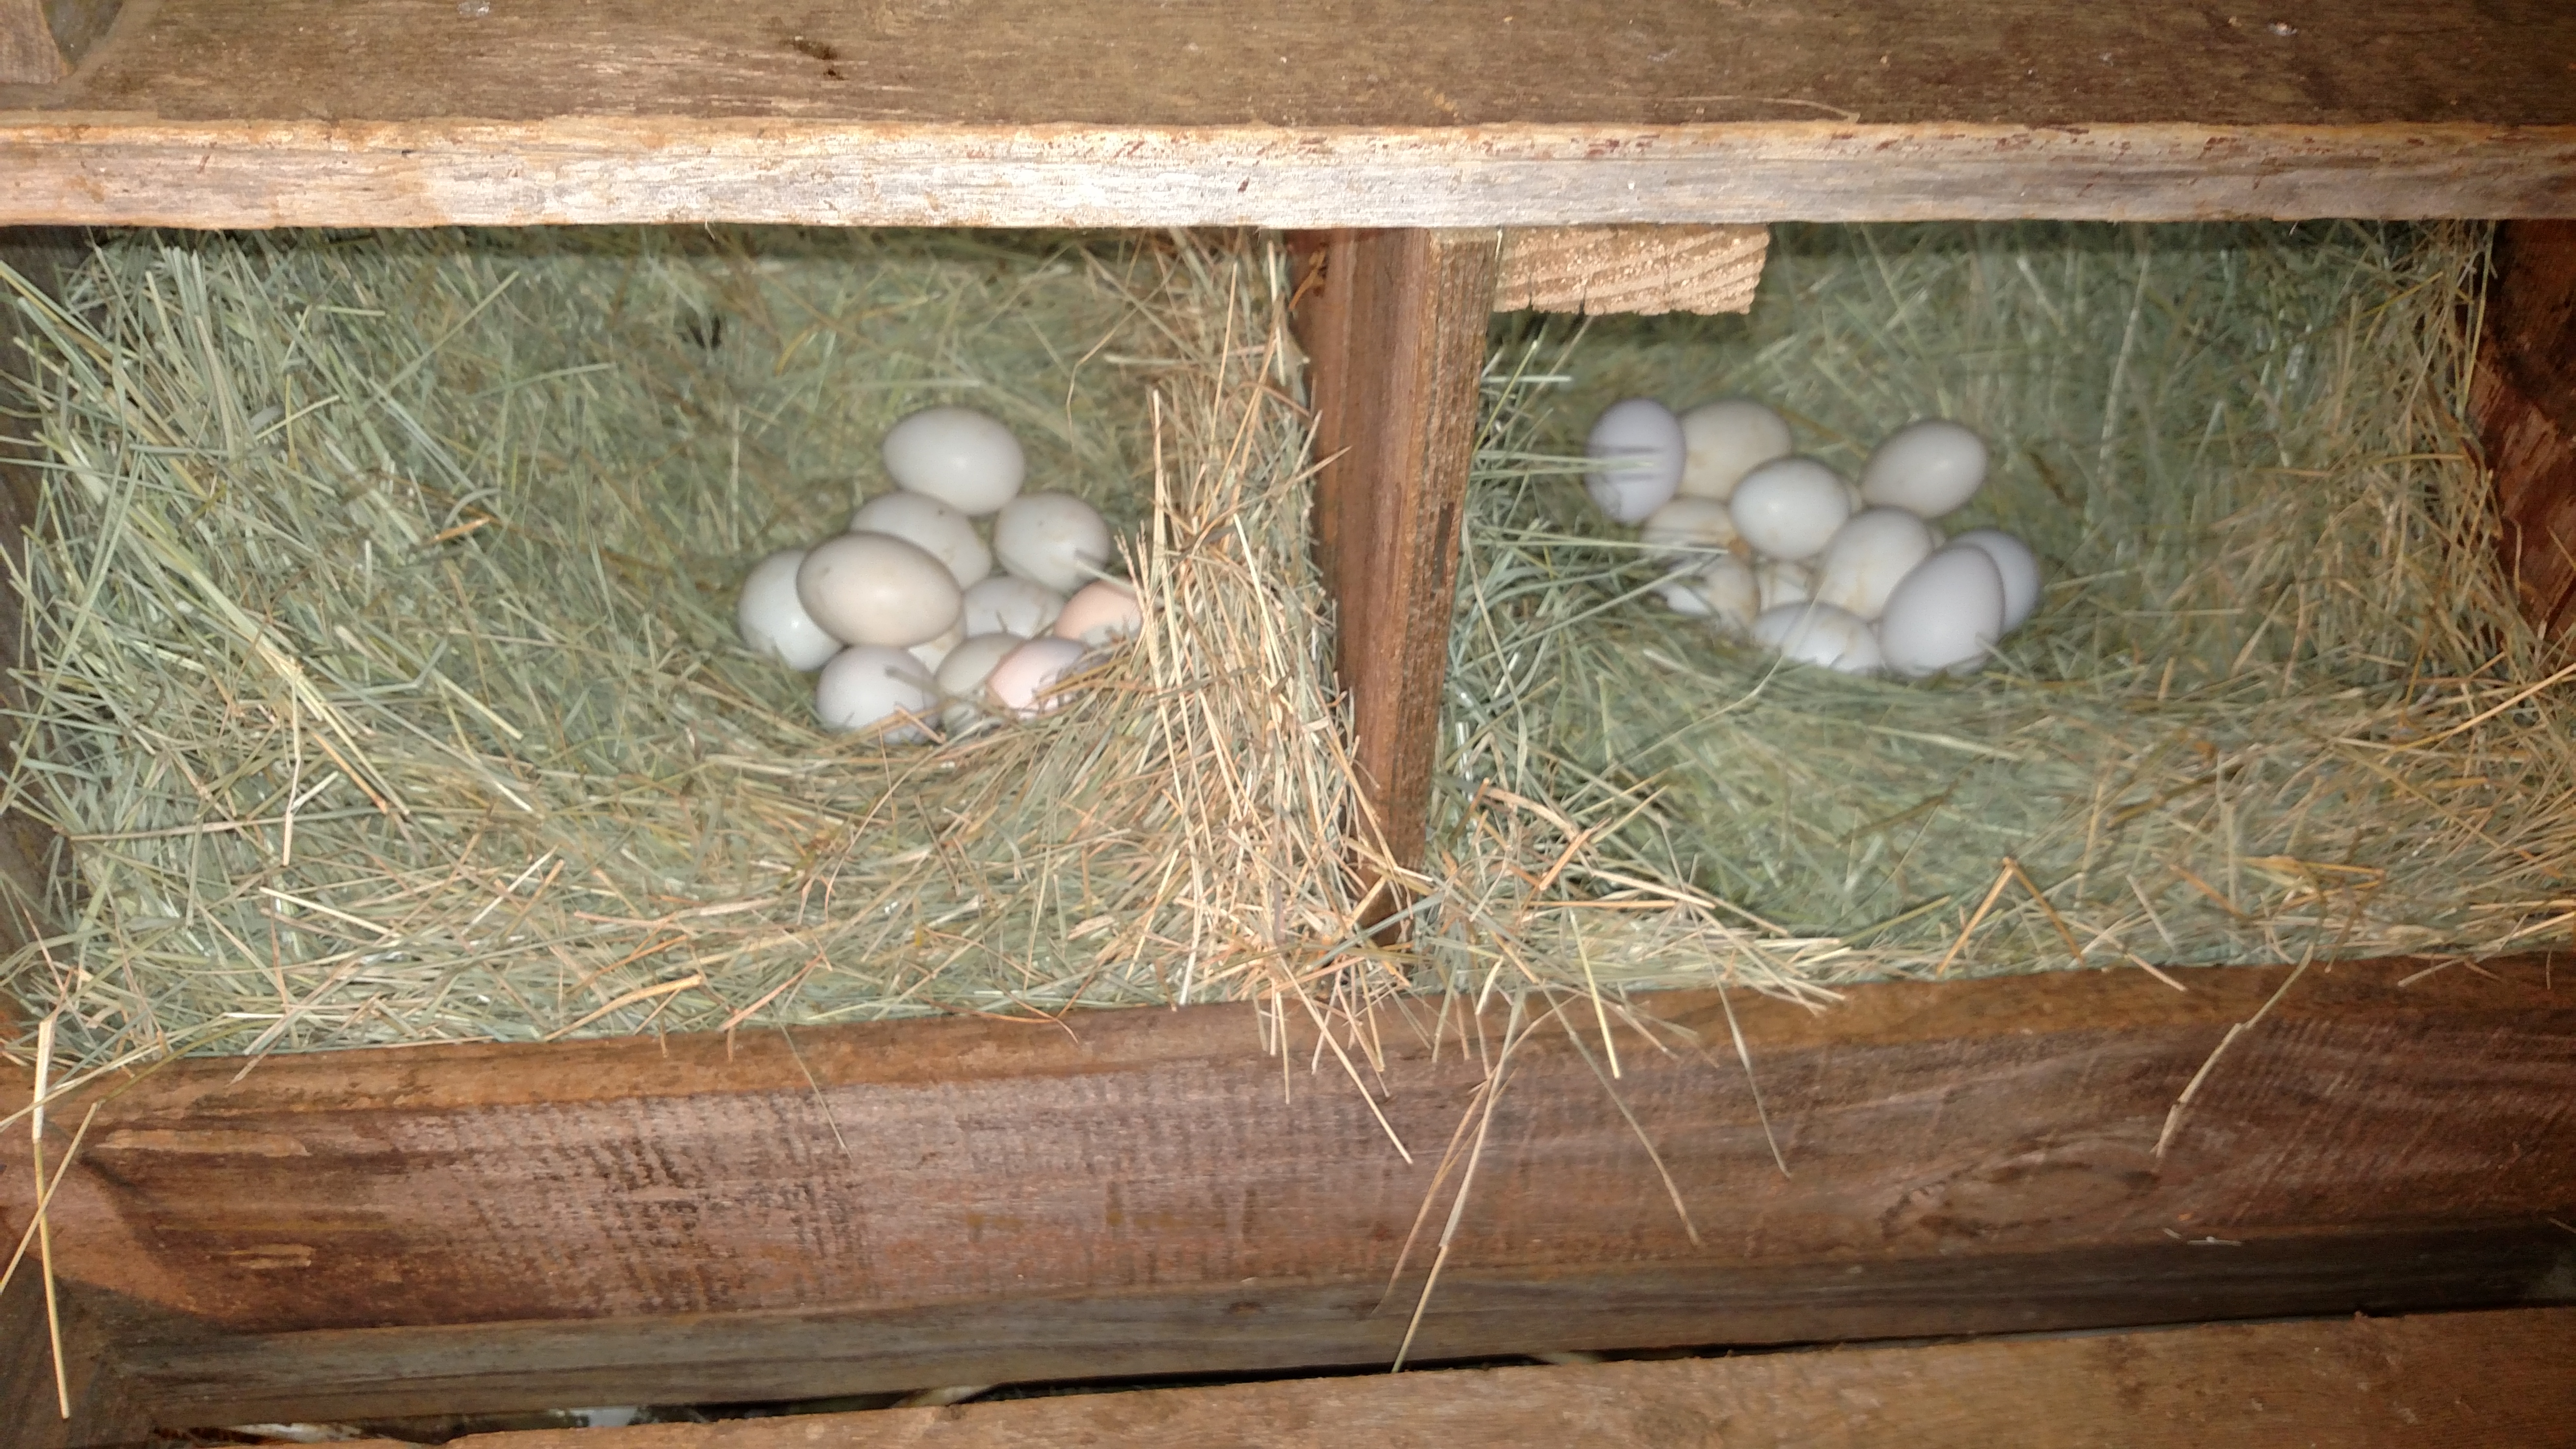 Stopped gathering eggs when I signed up on site.  Think I have 2 hens that are being broody.  One just jumped off when I put out feed.  Have put up heat lights and hung a sheet to block wind in nesting area.